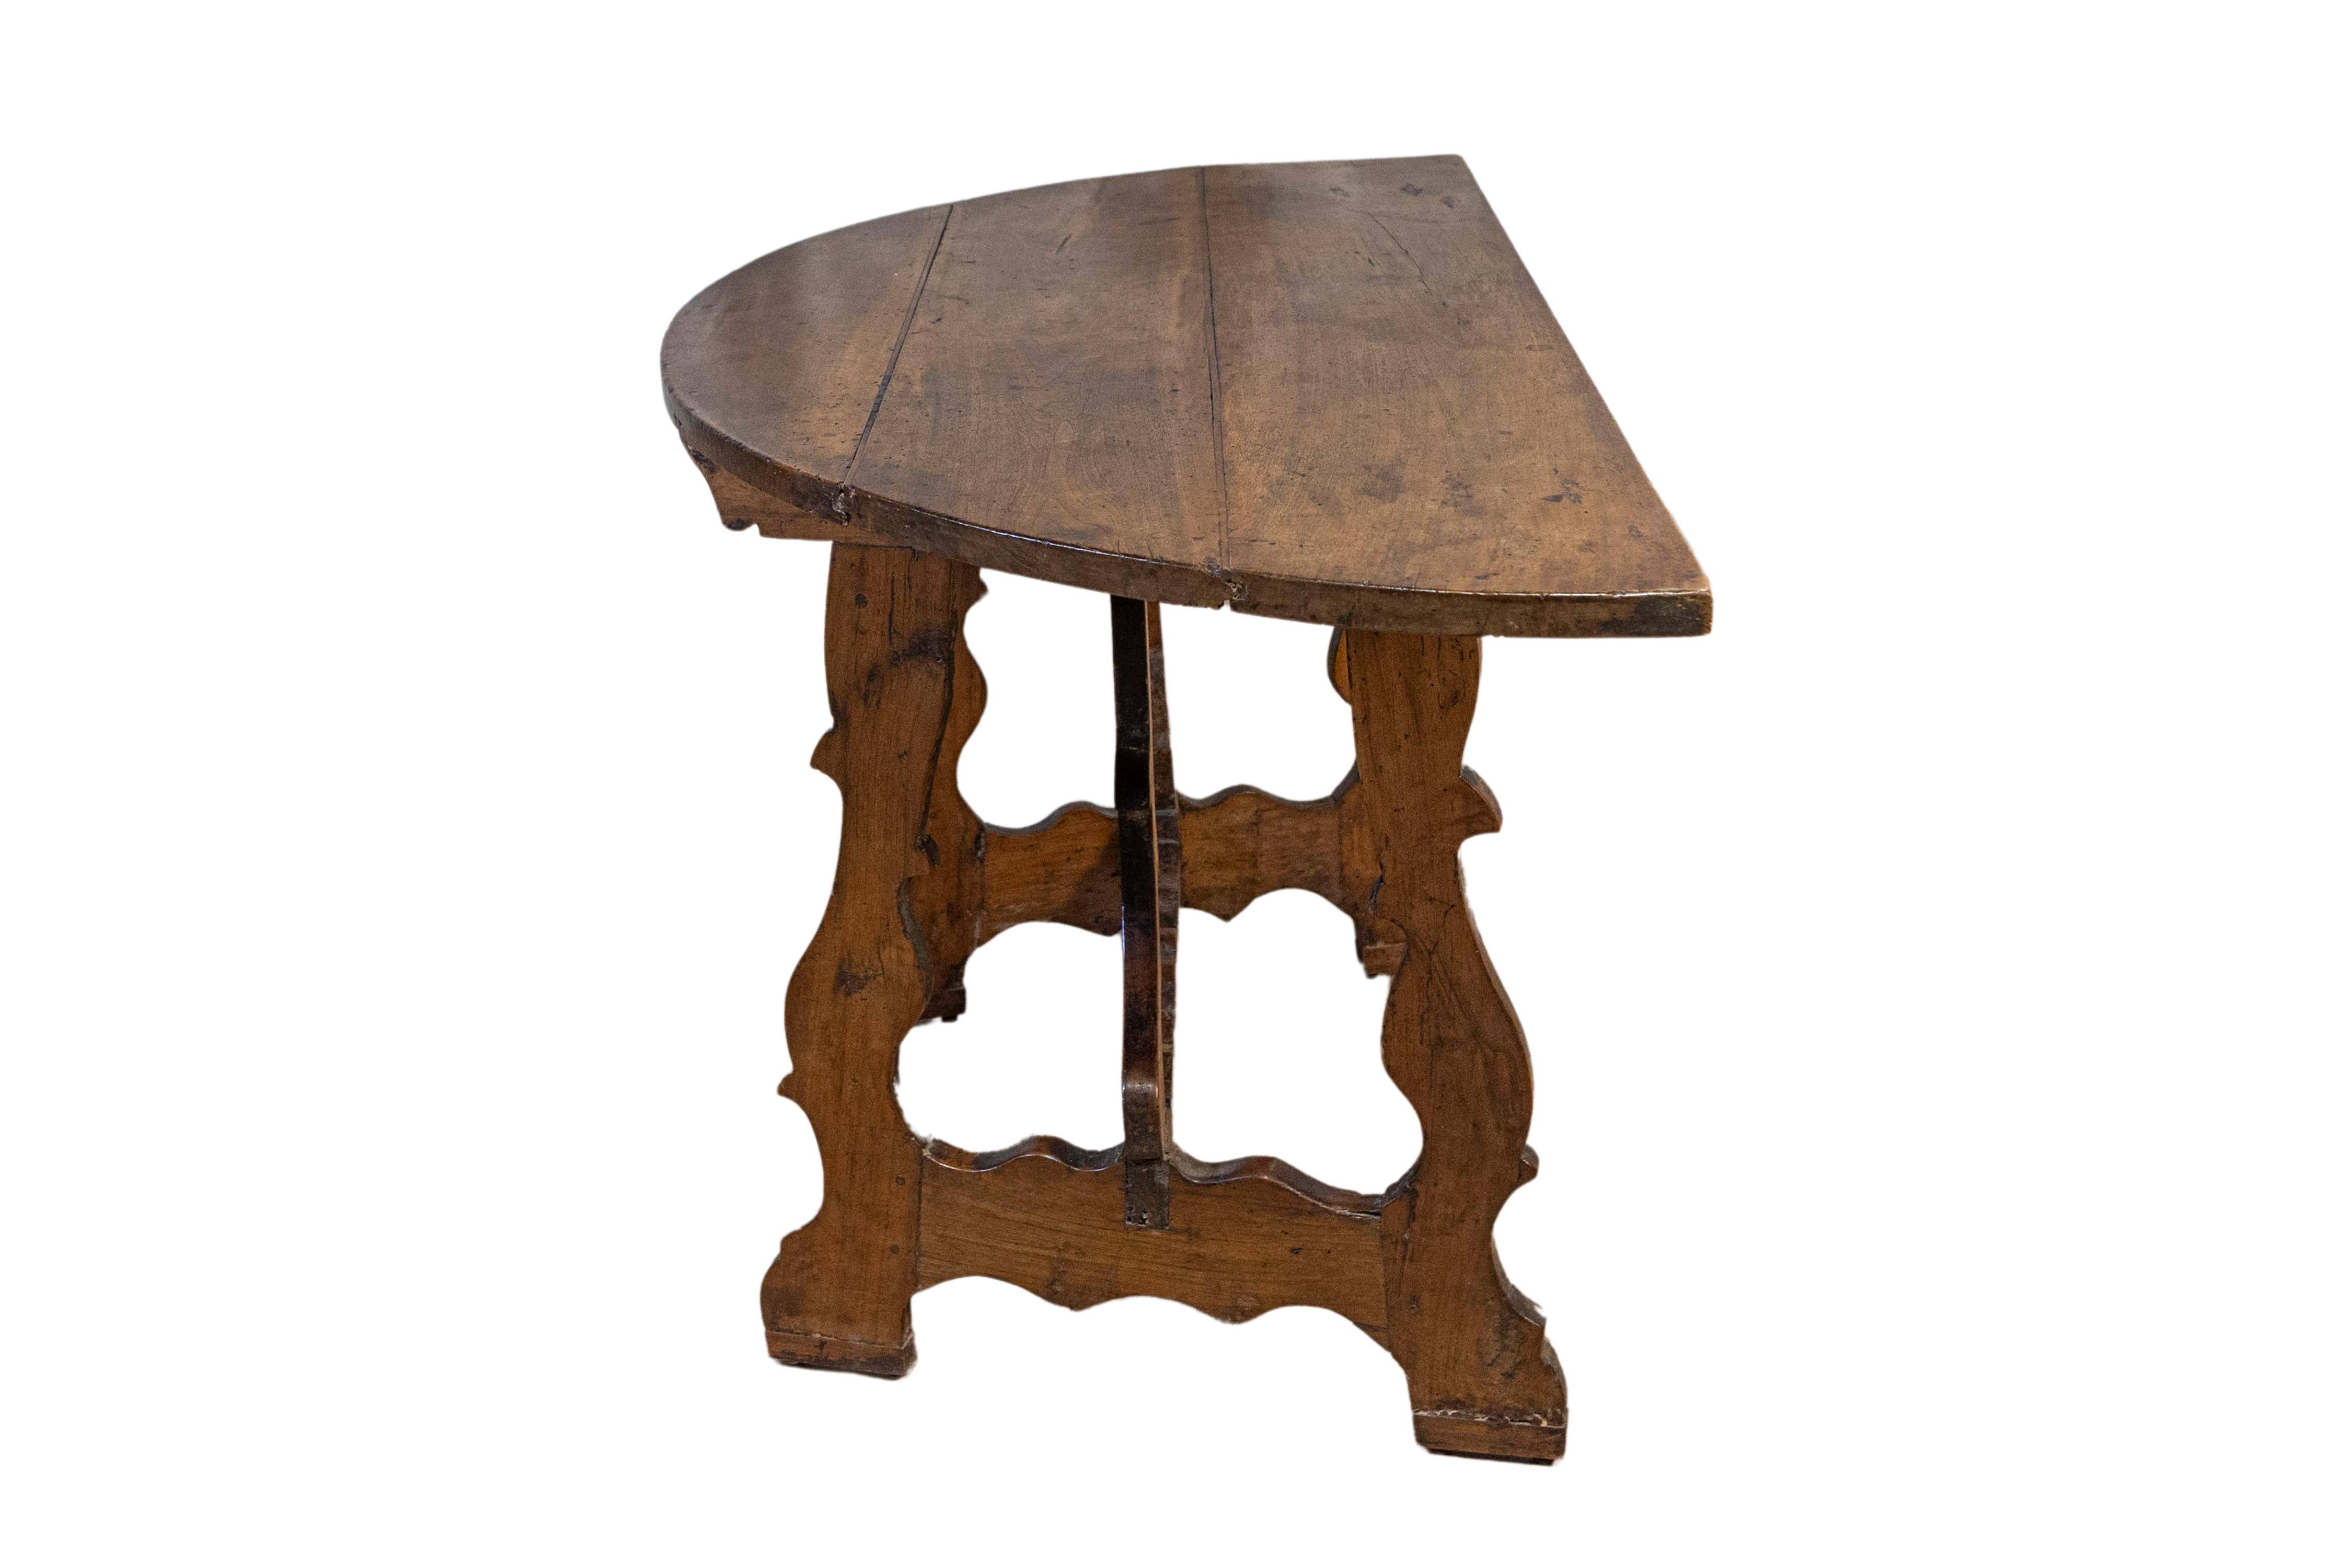 Hand-Carved 17th Century Italian Baroque Period Walnut Demilune Table with Carved Lyre Base For Sale